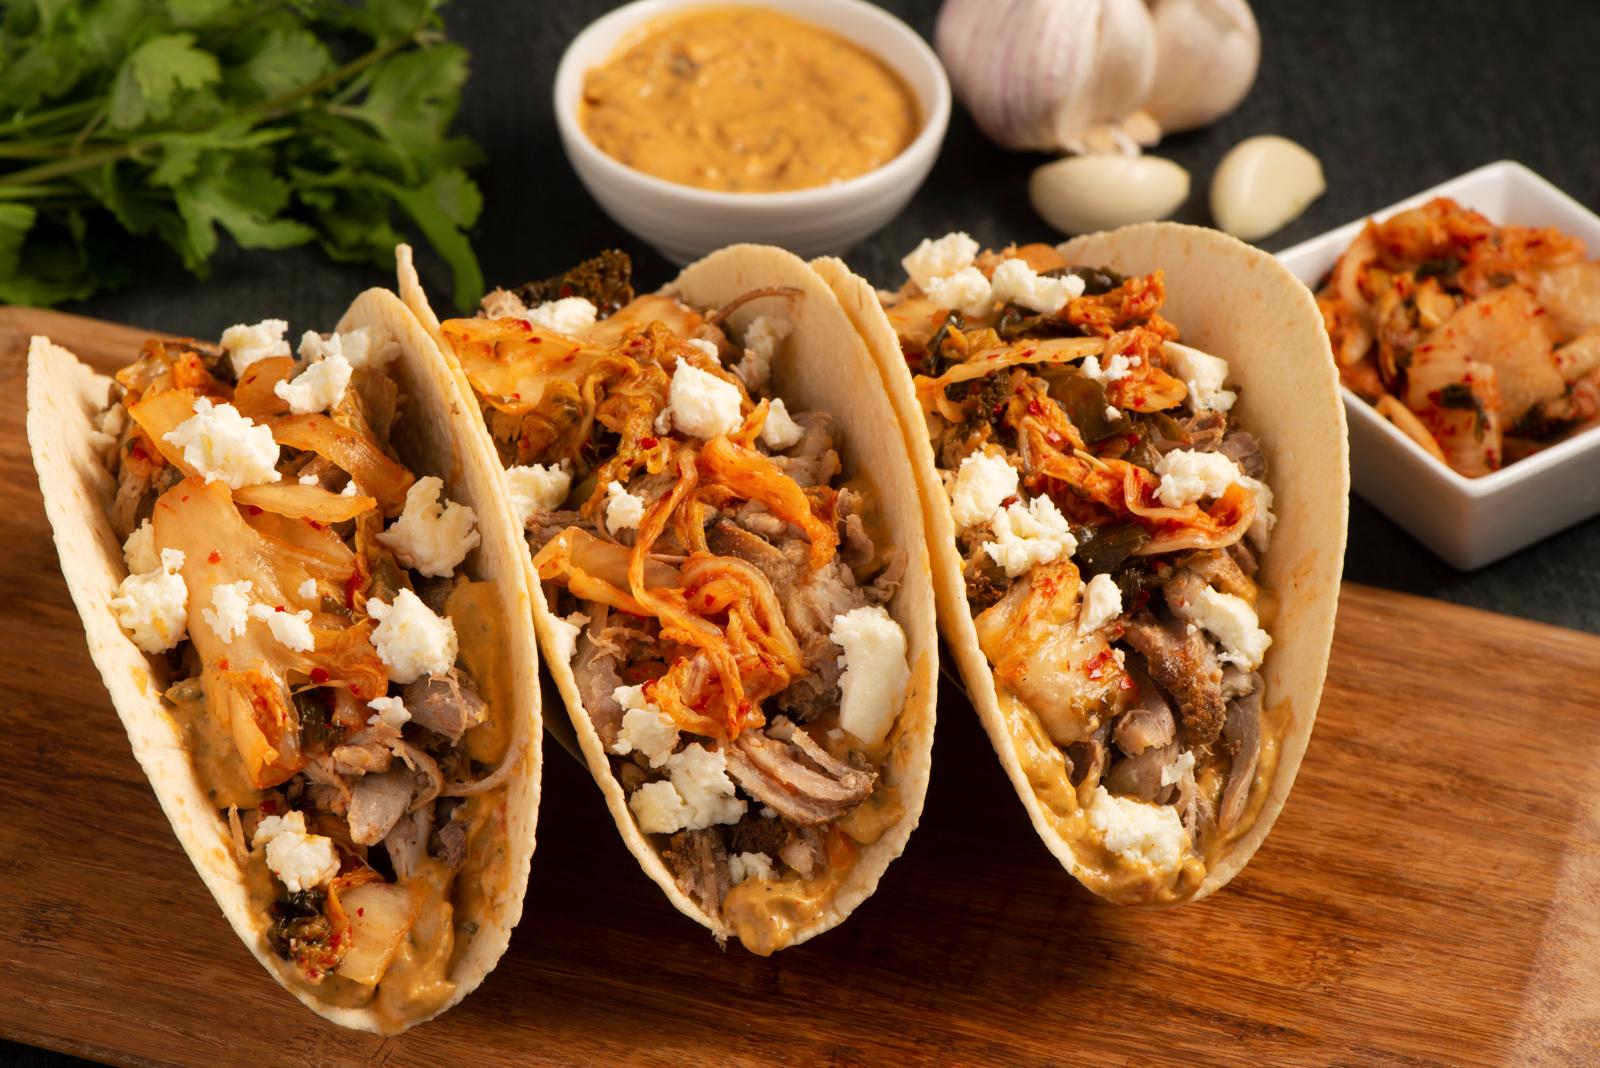 slow-roasted-pork-taco-with-red-curry-coconut-spread-kimchi-and-queso-fresco_compressed